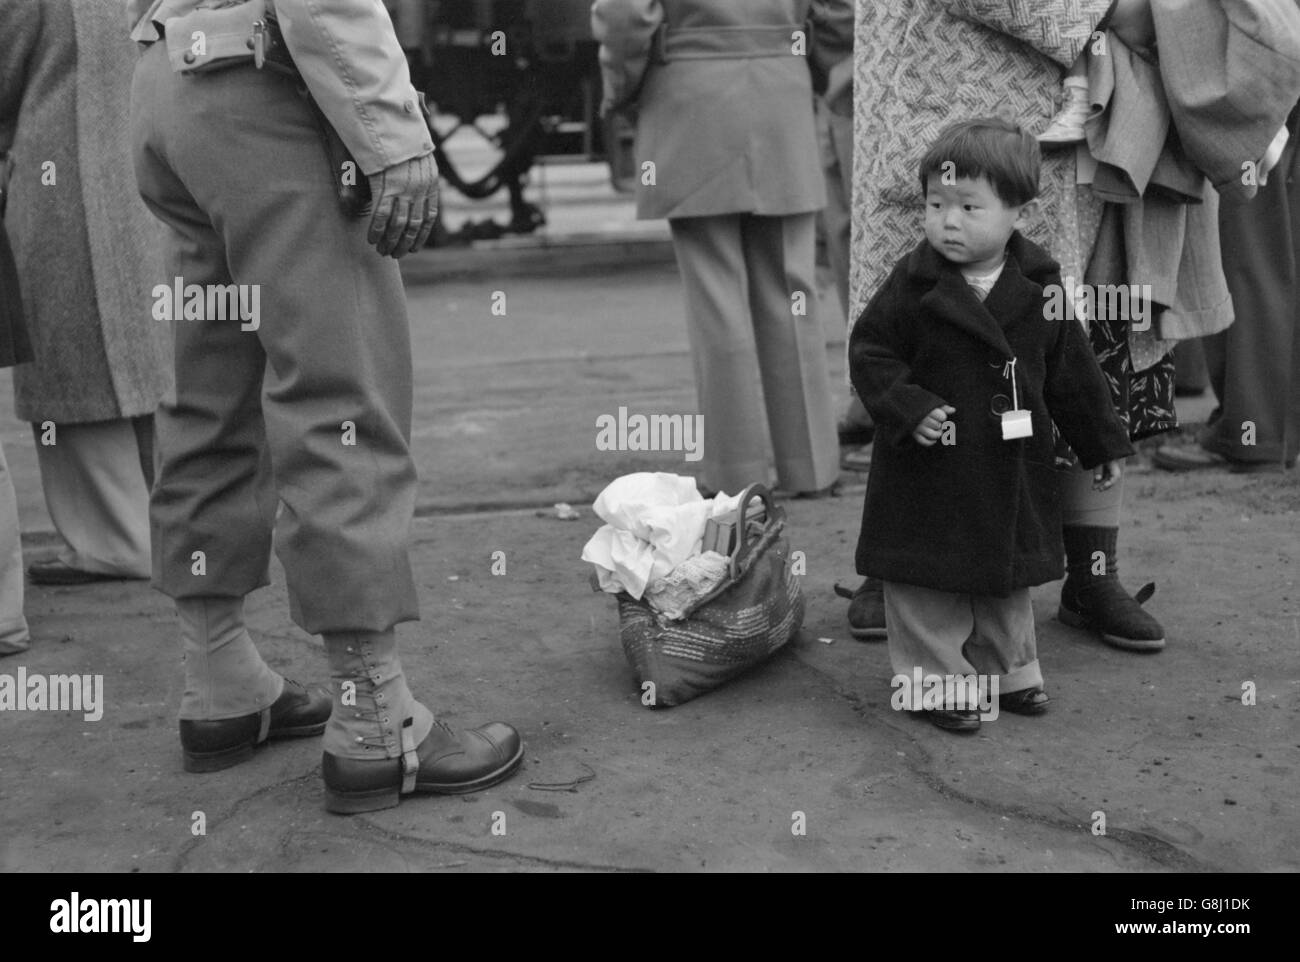 Japanese-American Child During Evacuation of Japanese-Americans from West Coast Areas under U.S. Army War Emergency Order, Los Angeles, California, USA, Russell Lee, April 1942 Stock Photo